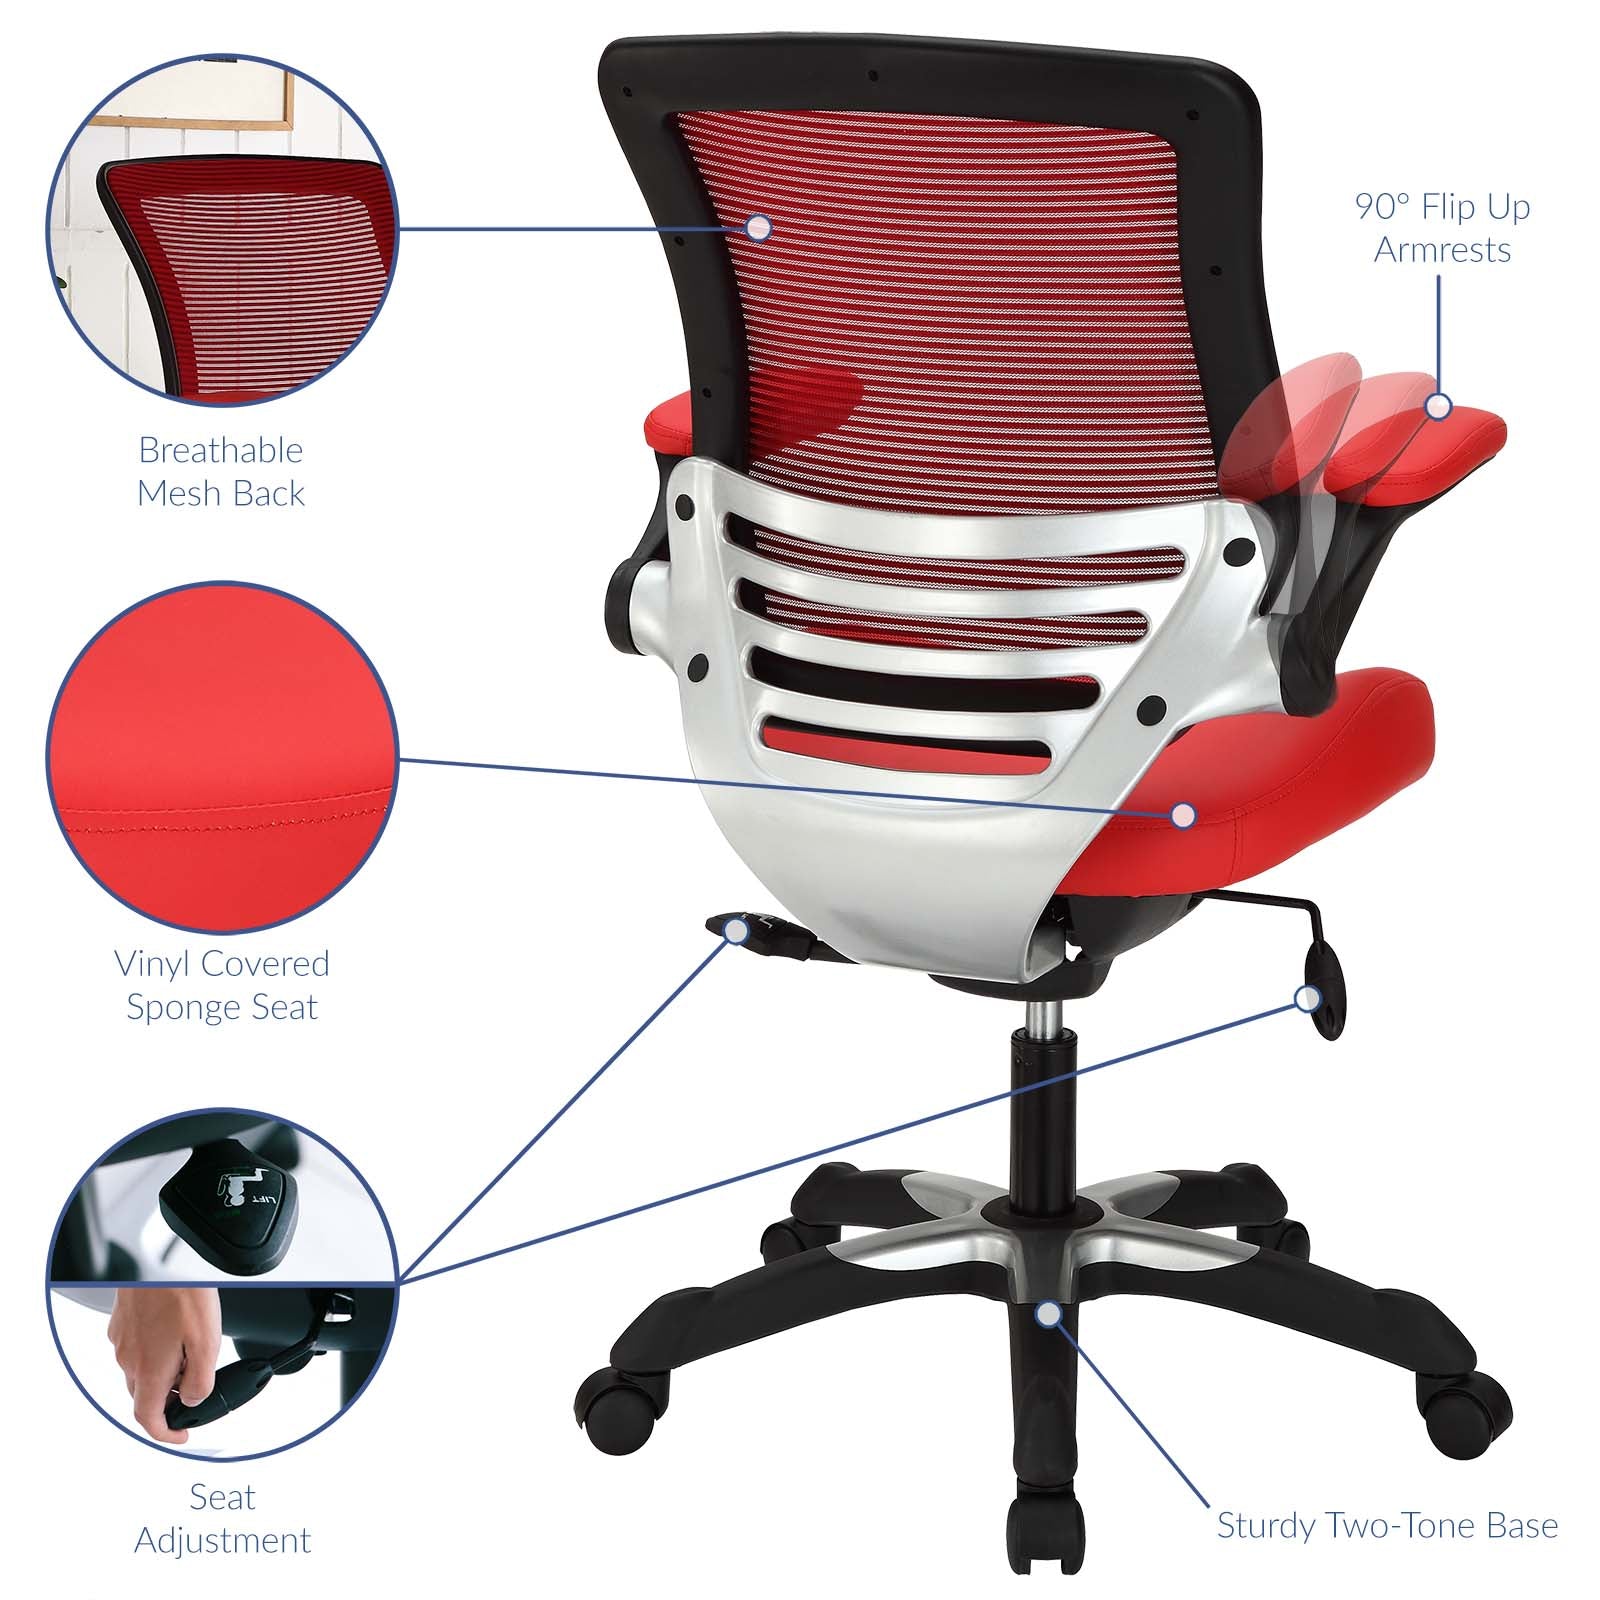 Edge Vinyl Office Chair-Office Chair-Modway-Wall2Wall Furnishings